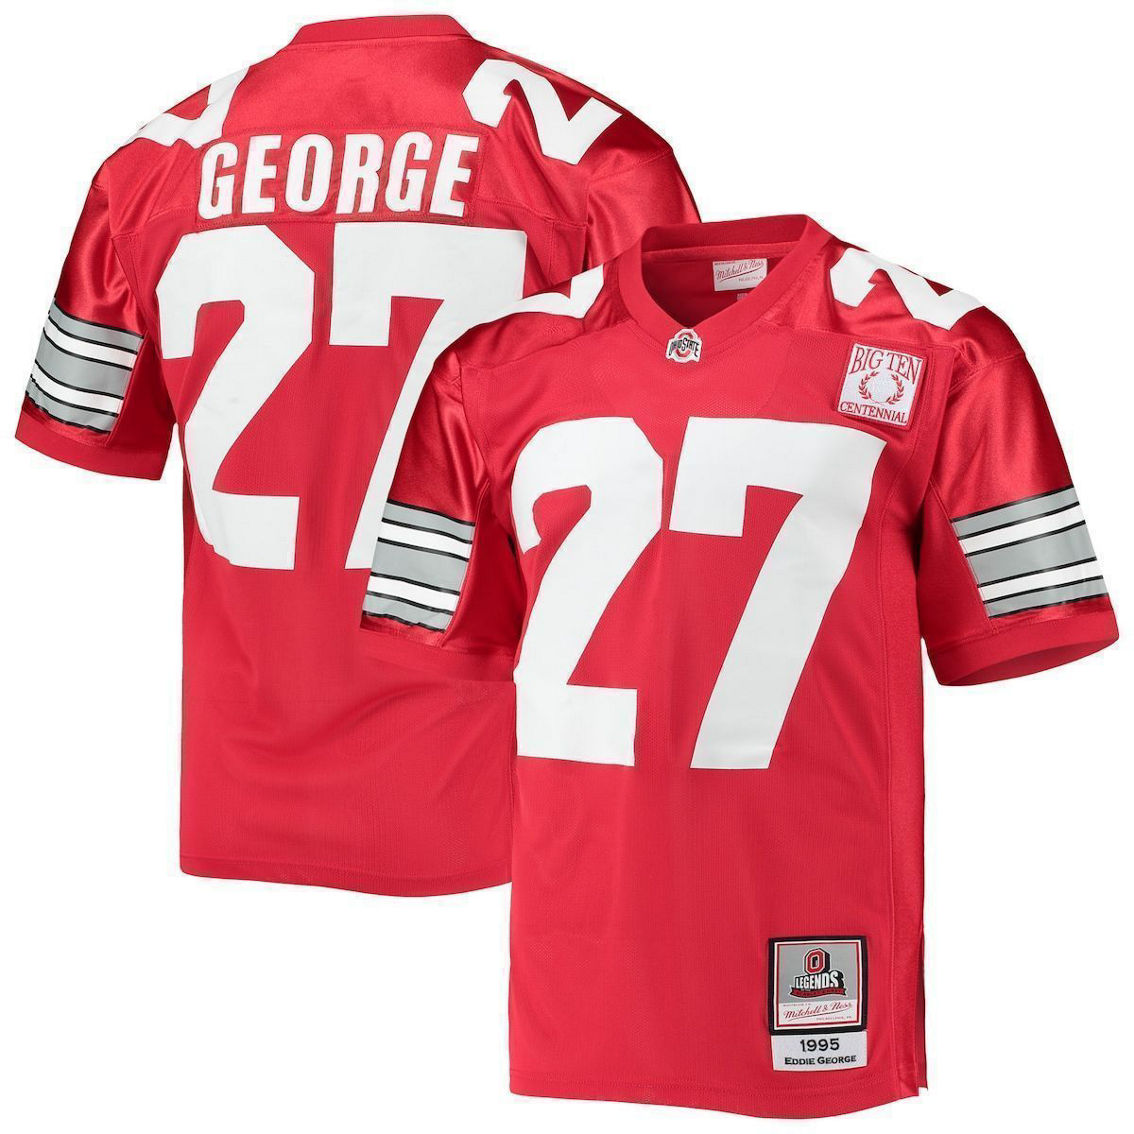 Mitchell & Ness Men's Eddie George Scarlet Ohio State Buckeyes 1995 Authentic Throwback Football Jersey - Image 2 of 4